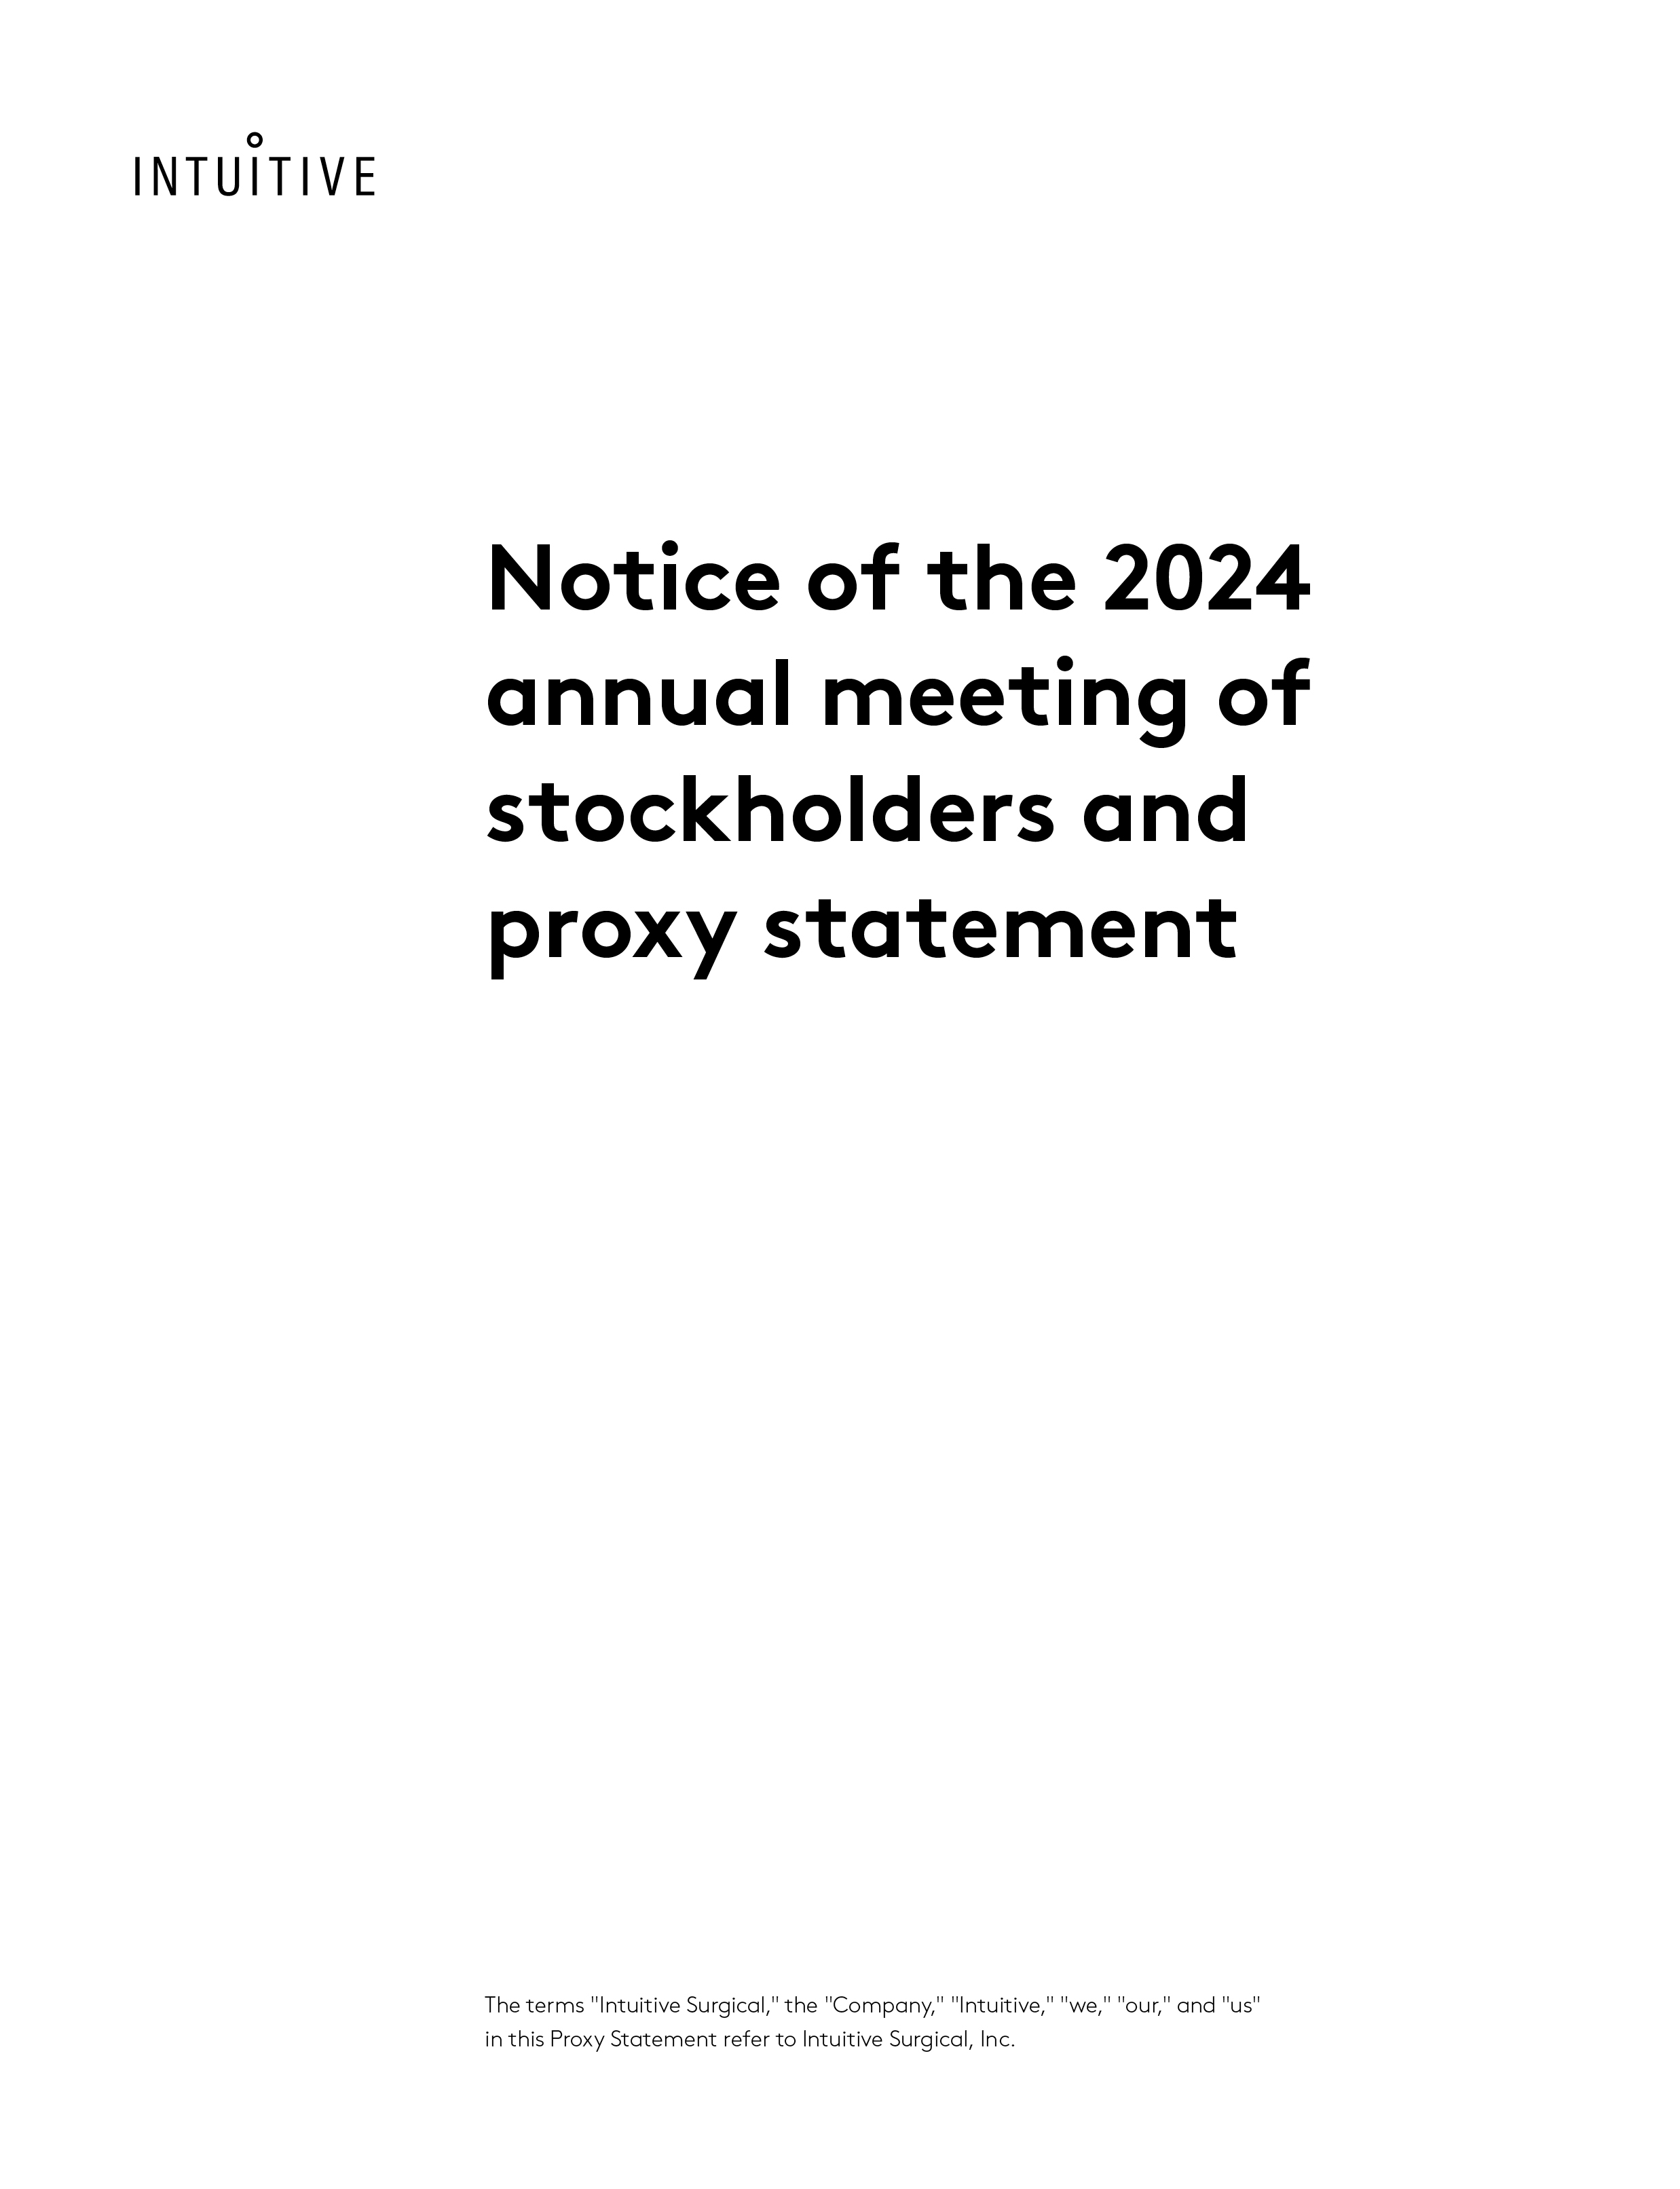 Intuitive_2024_Proxy_Statement_Cover.jpg